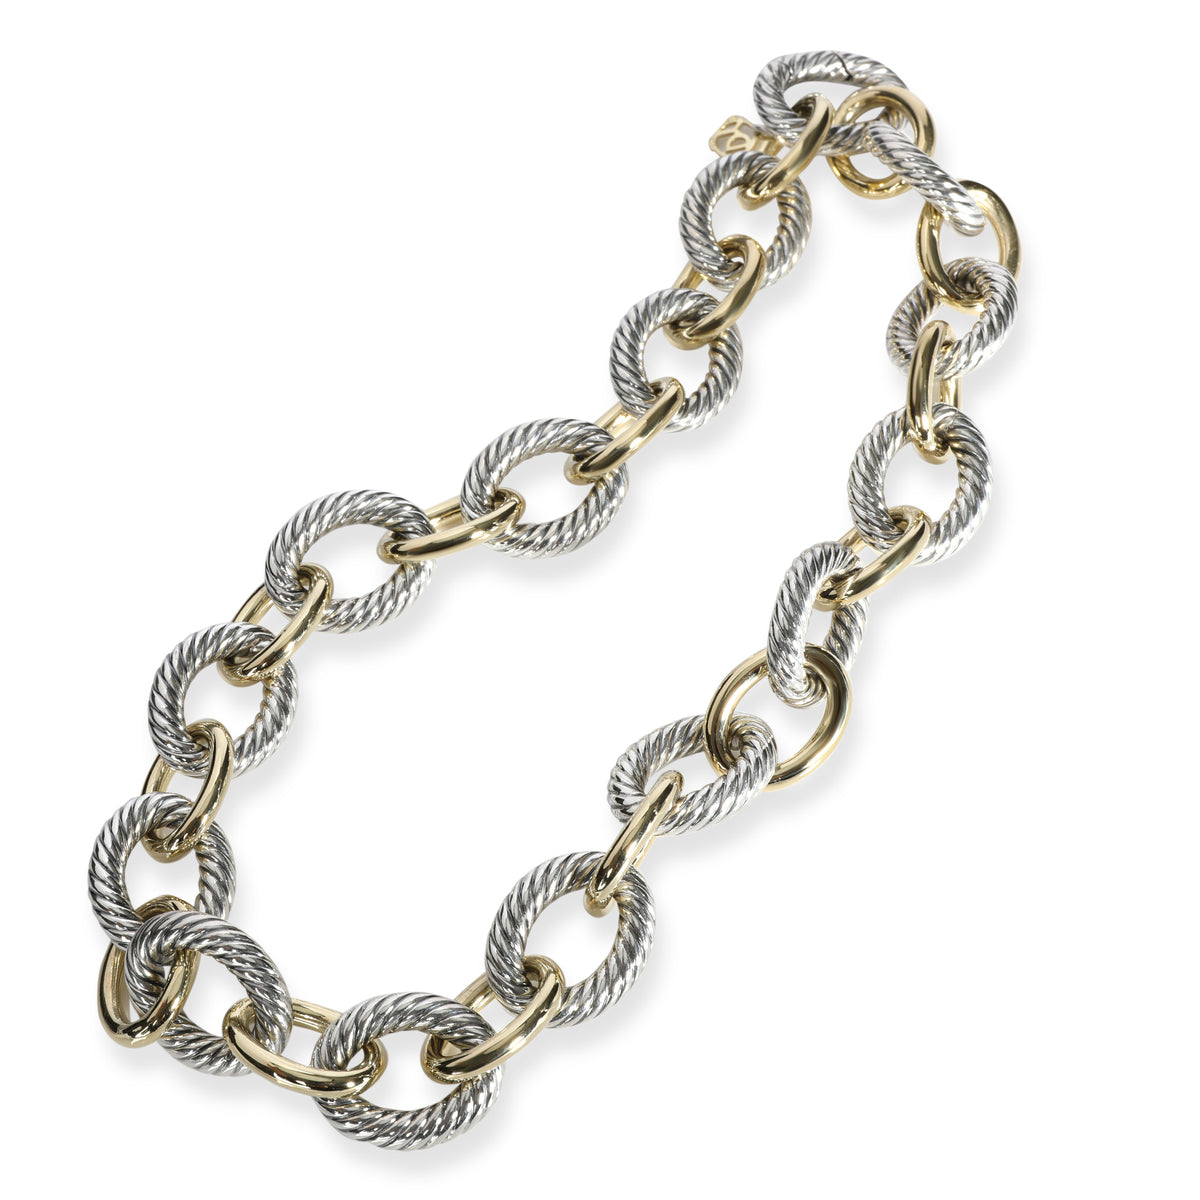 David Yurman Cable Chain Necklace in 18K Yellow Gold & Sterling Silver